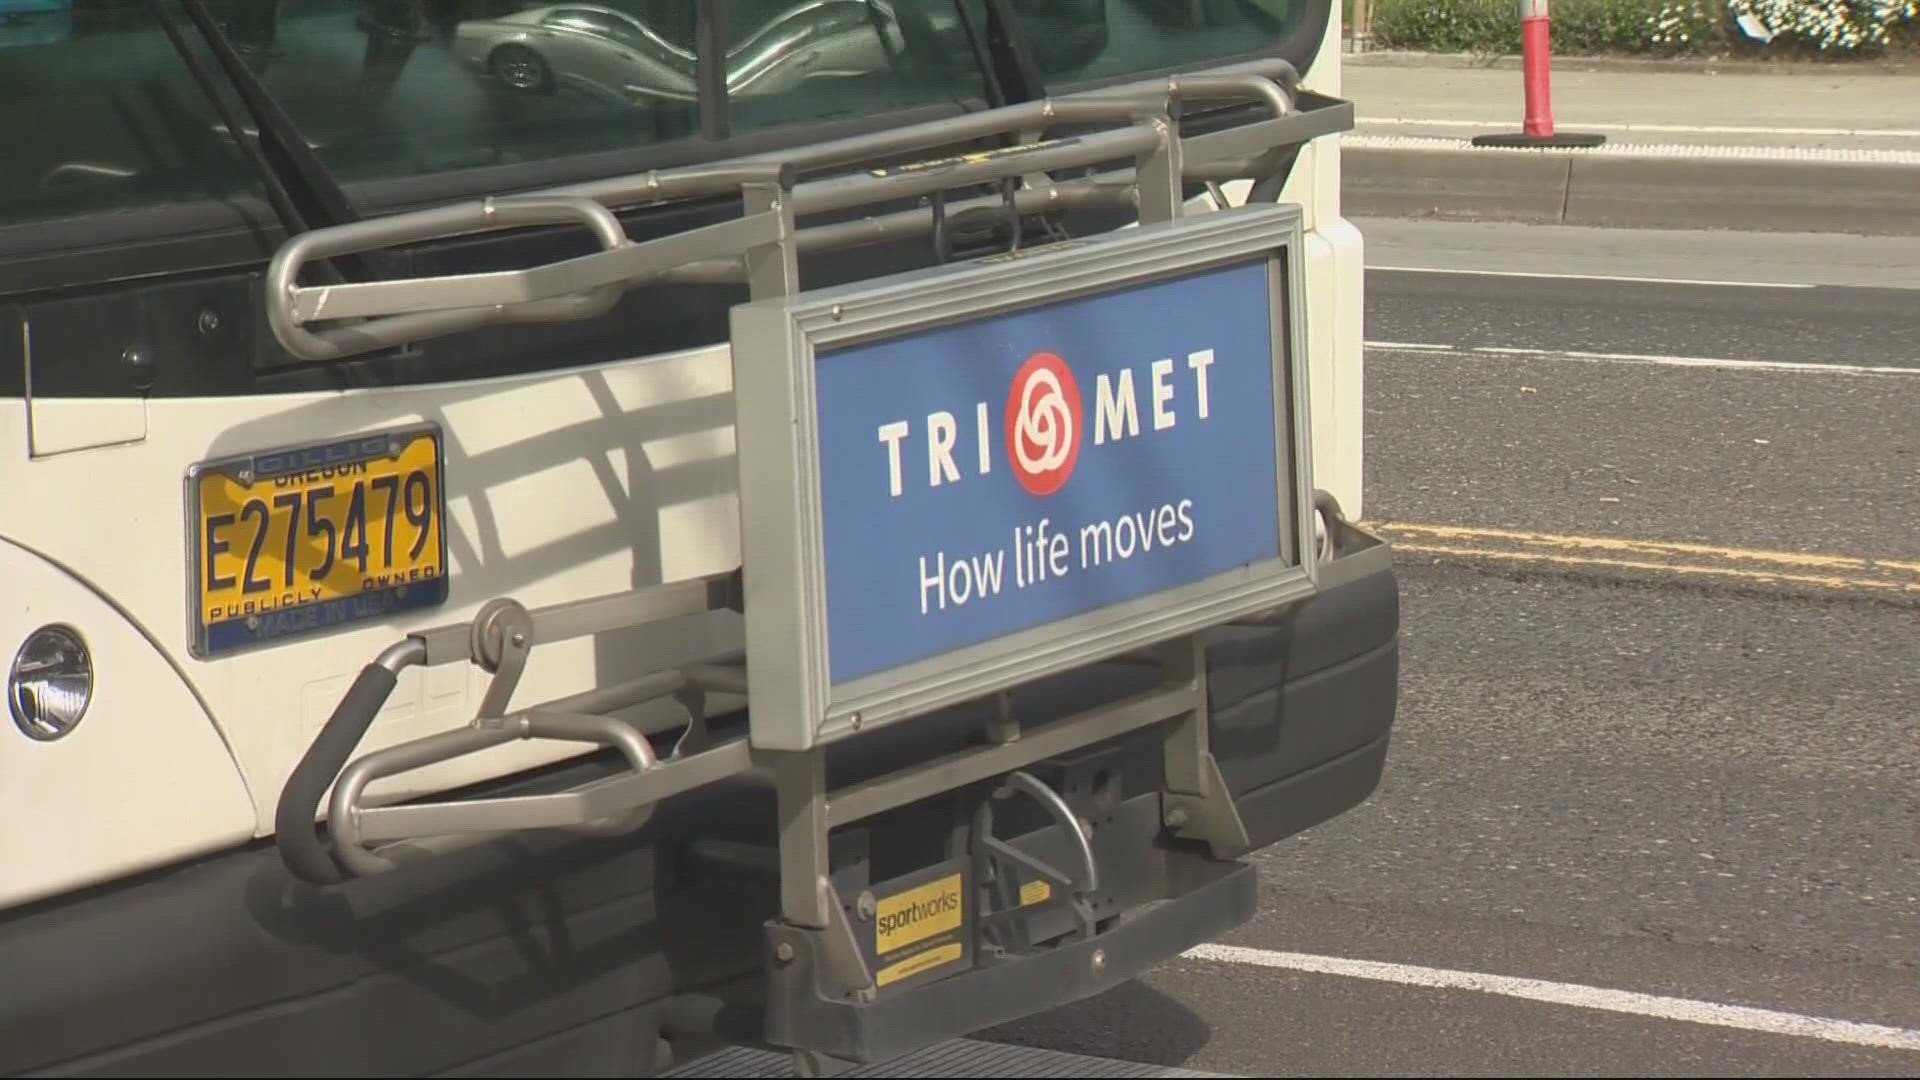 TriMet said starting in September, the agency will temporarily shift, reduce or cancel some service until operator numbers increase.